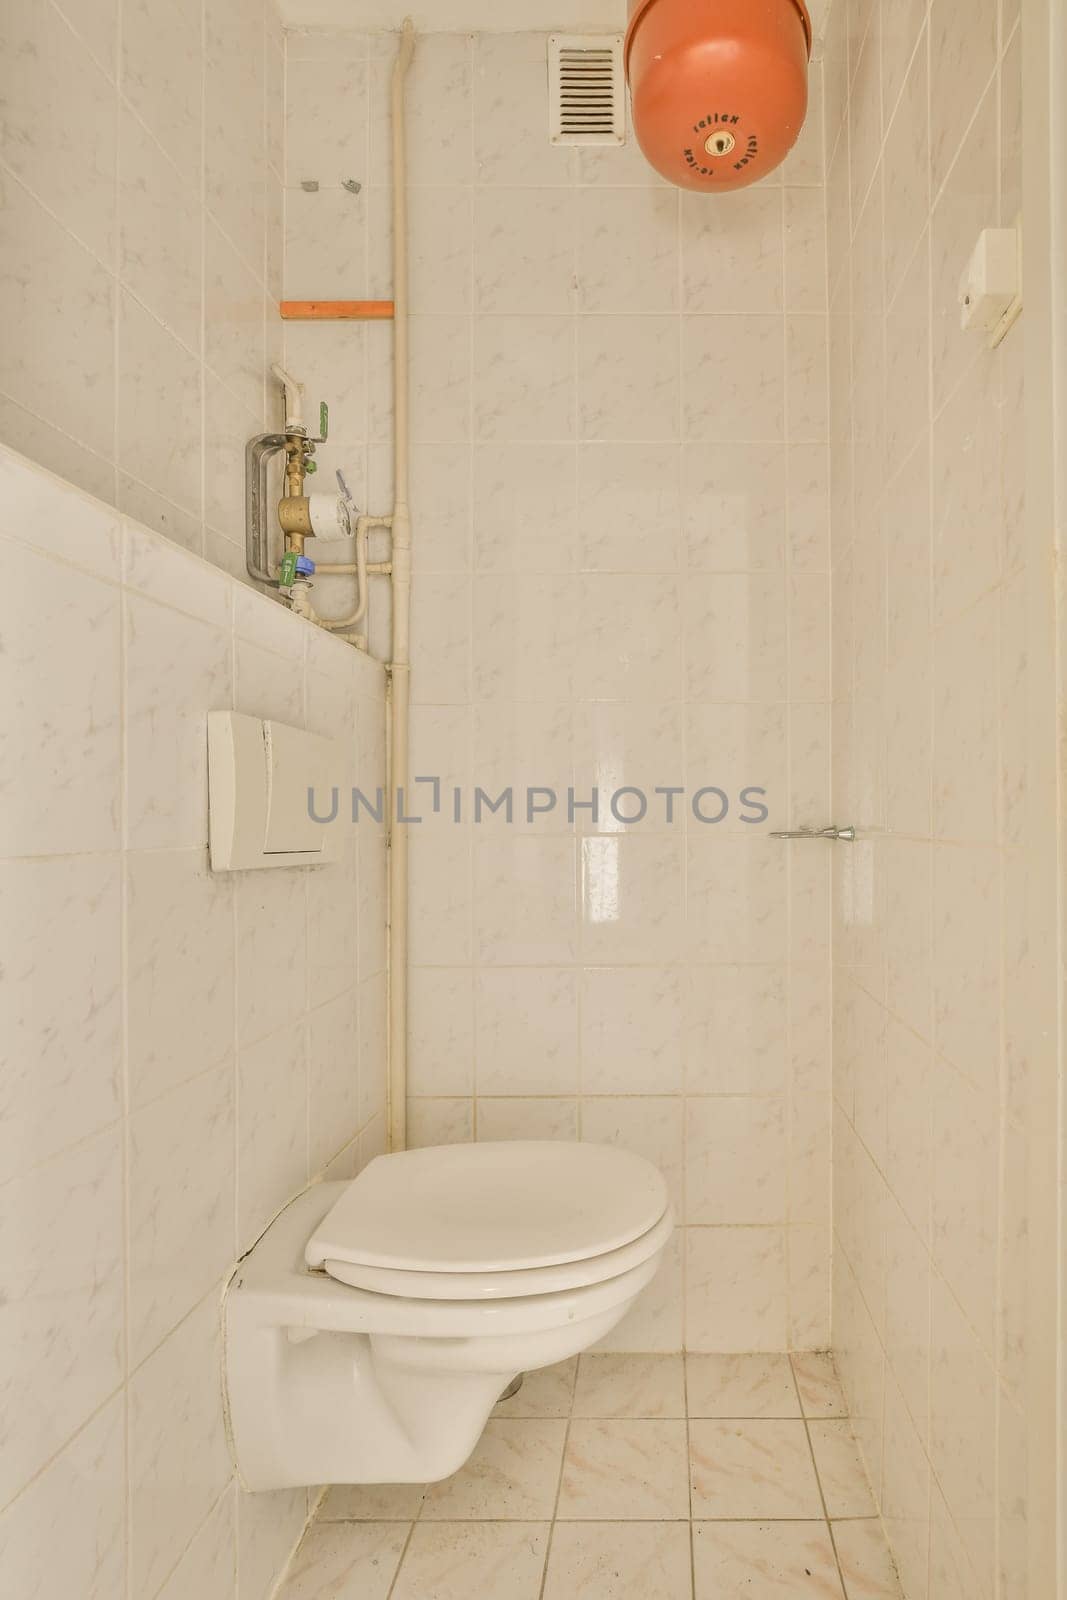 a bathroom with a toilet and an orange ball hanging on the wall in front of the toilet is white marble tiles